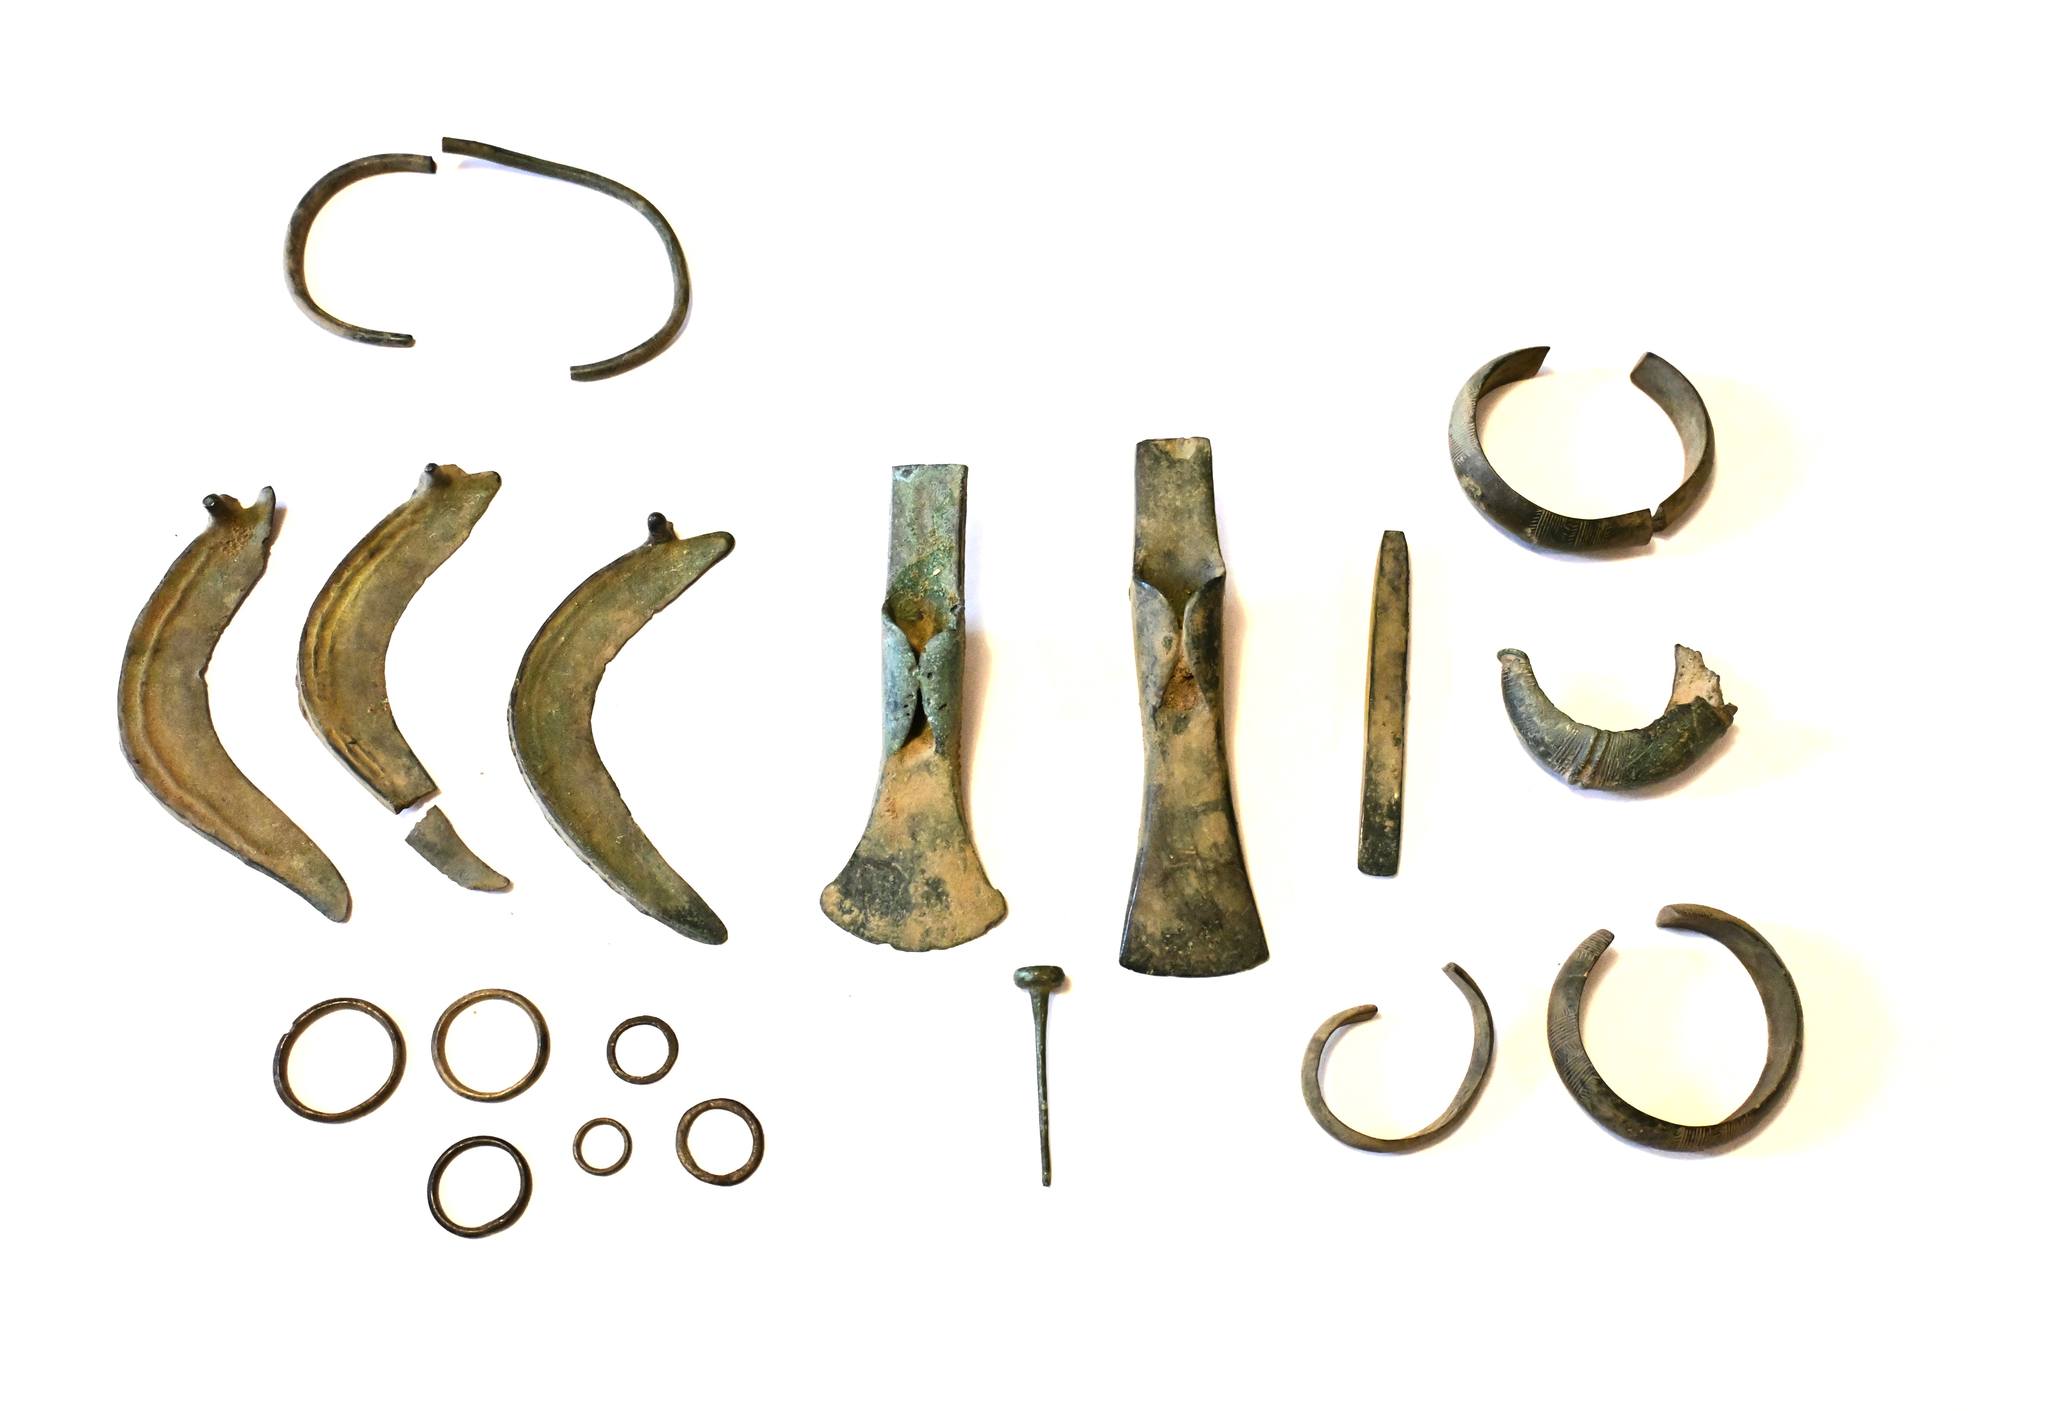 A group of Bronze Age metal objects discovered in Poland